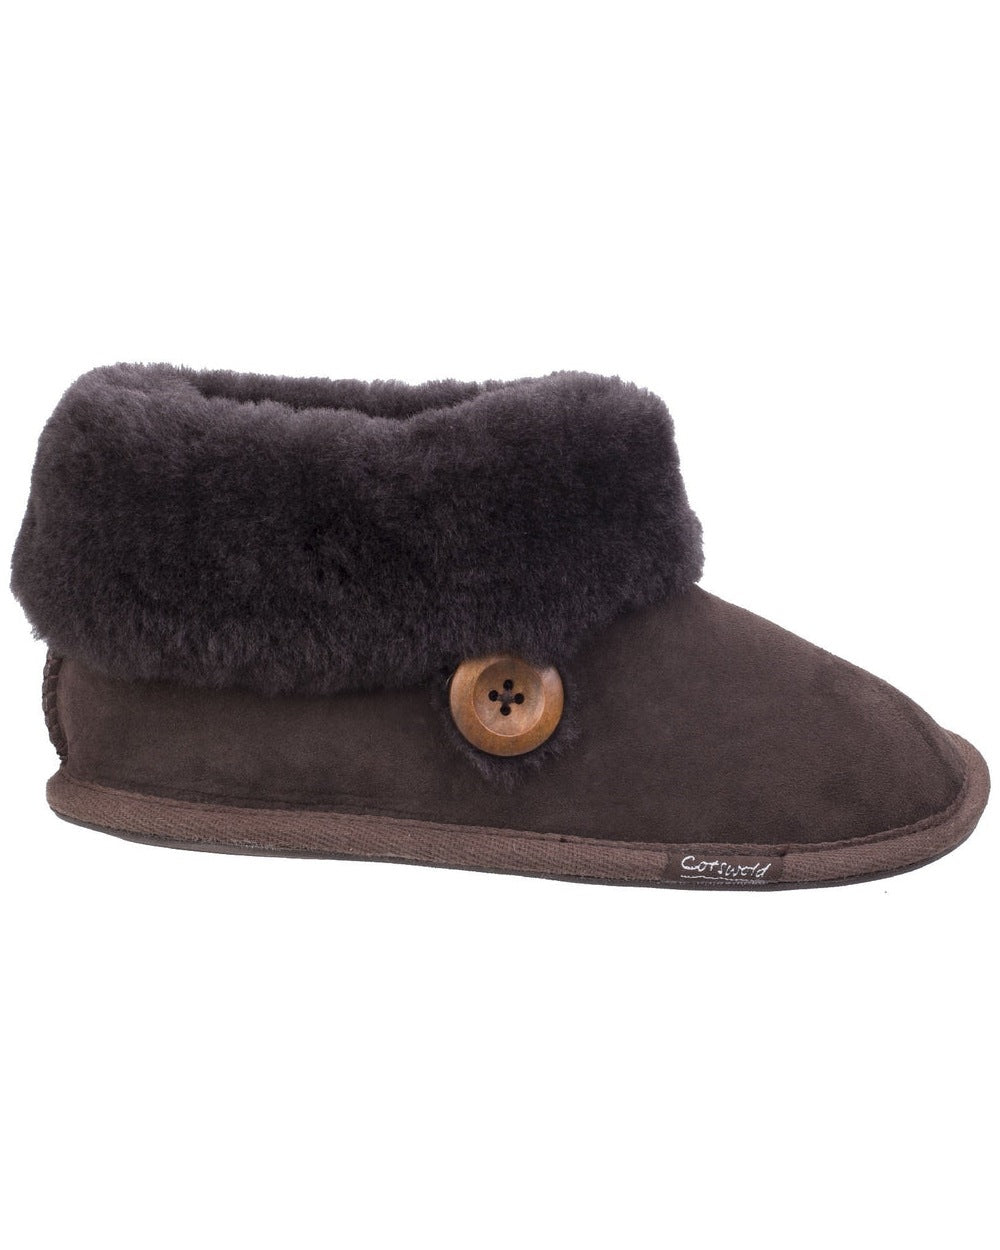 Cotswold Womens Wotton Sheepskin Bootie Slippers in Chocolate 